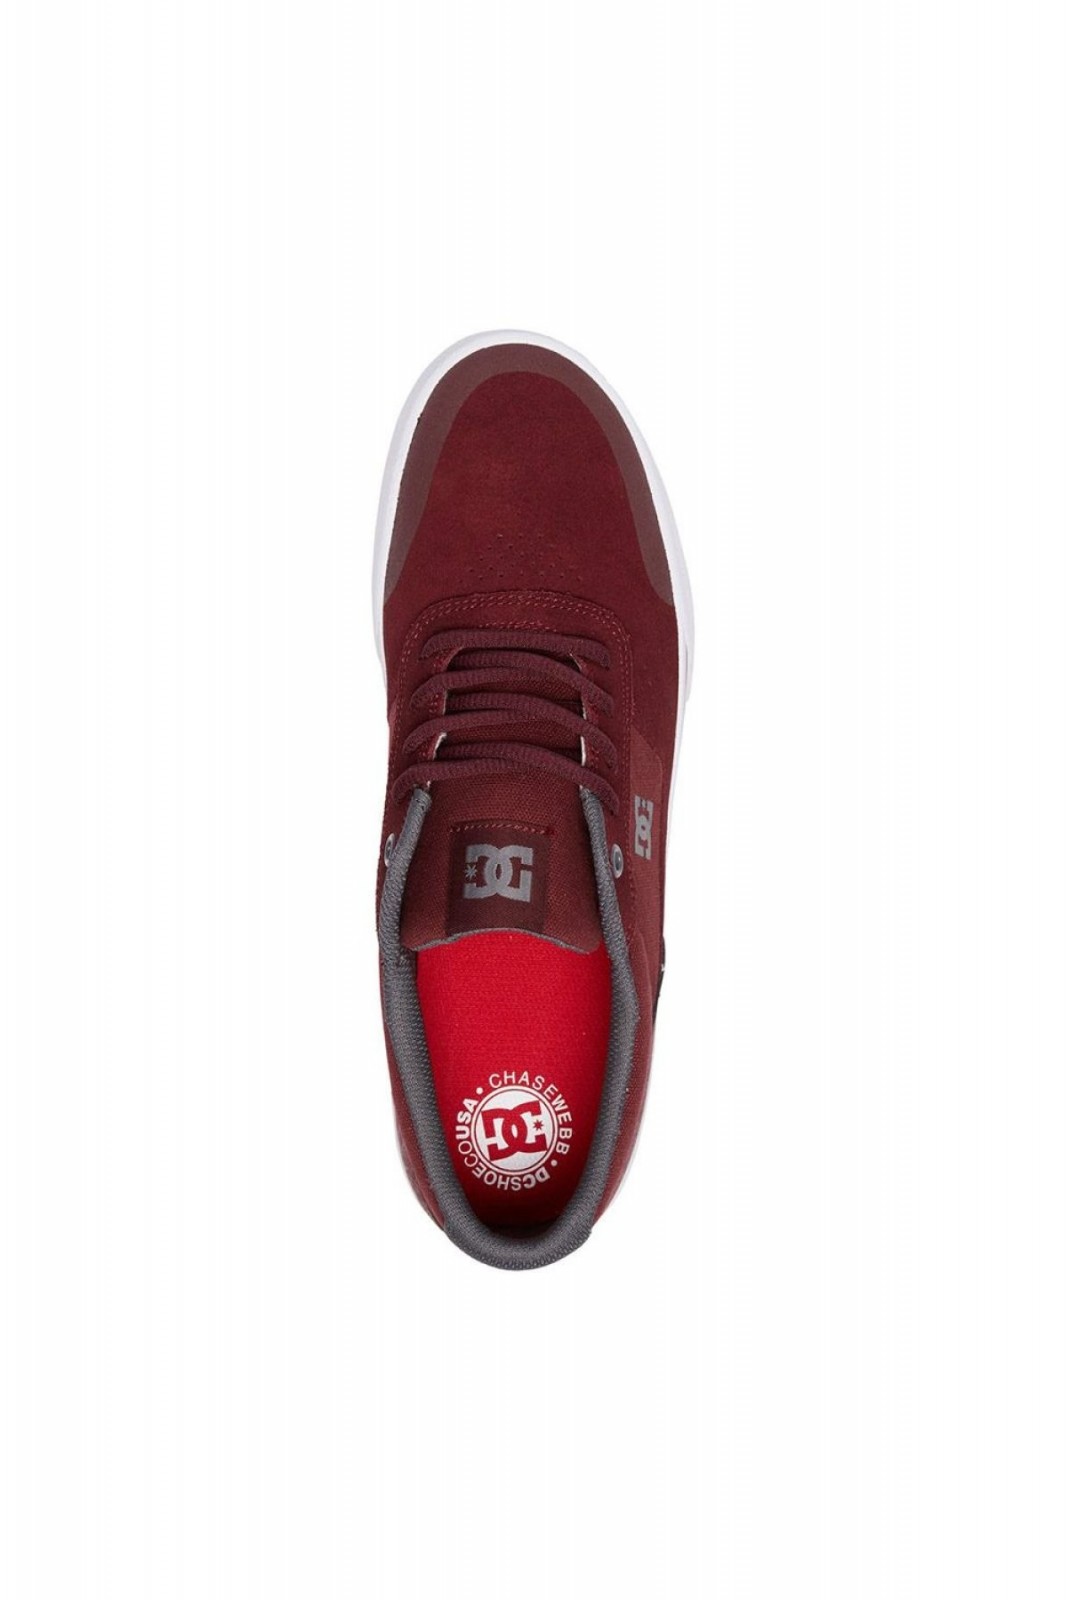 Sneakers cuir toile Switch Plus Dc shoes BUR ADYS300399